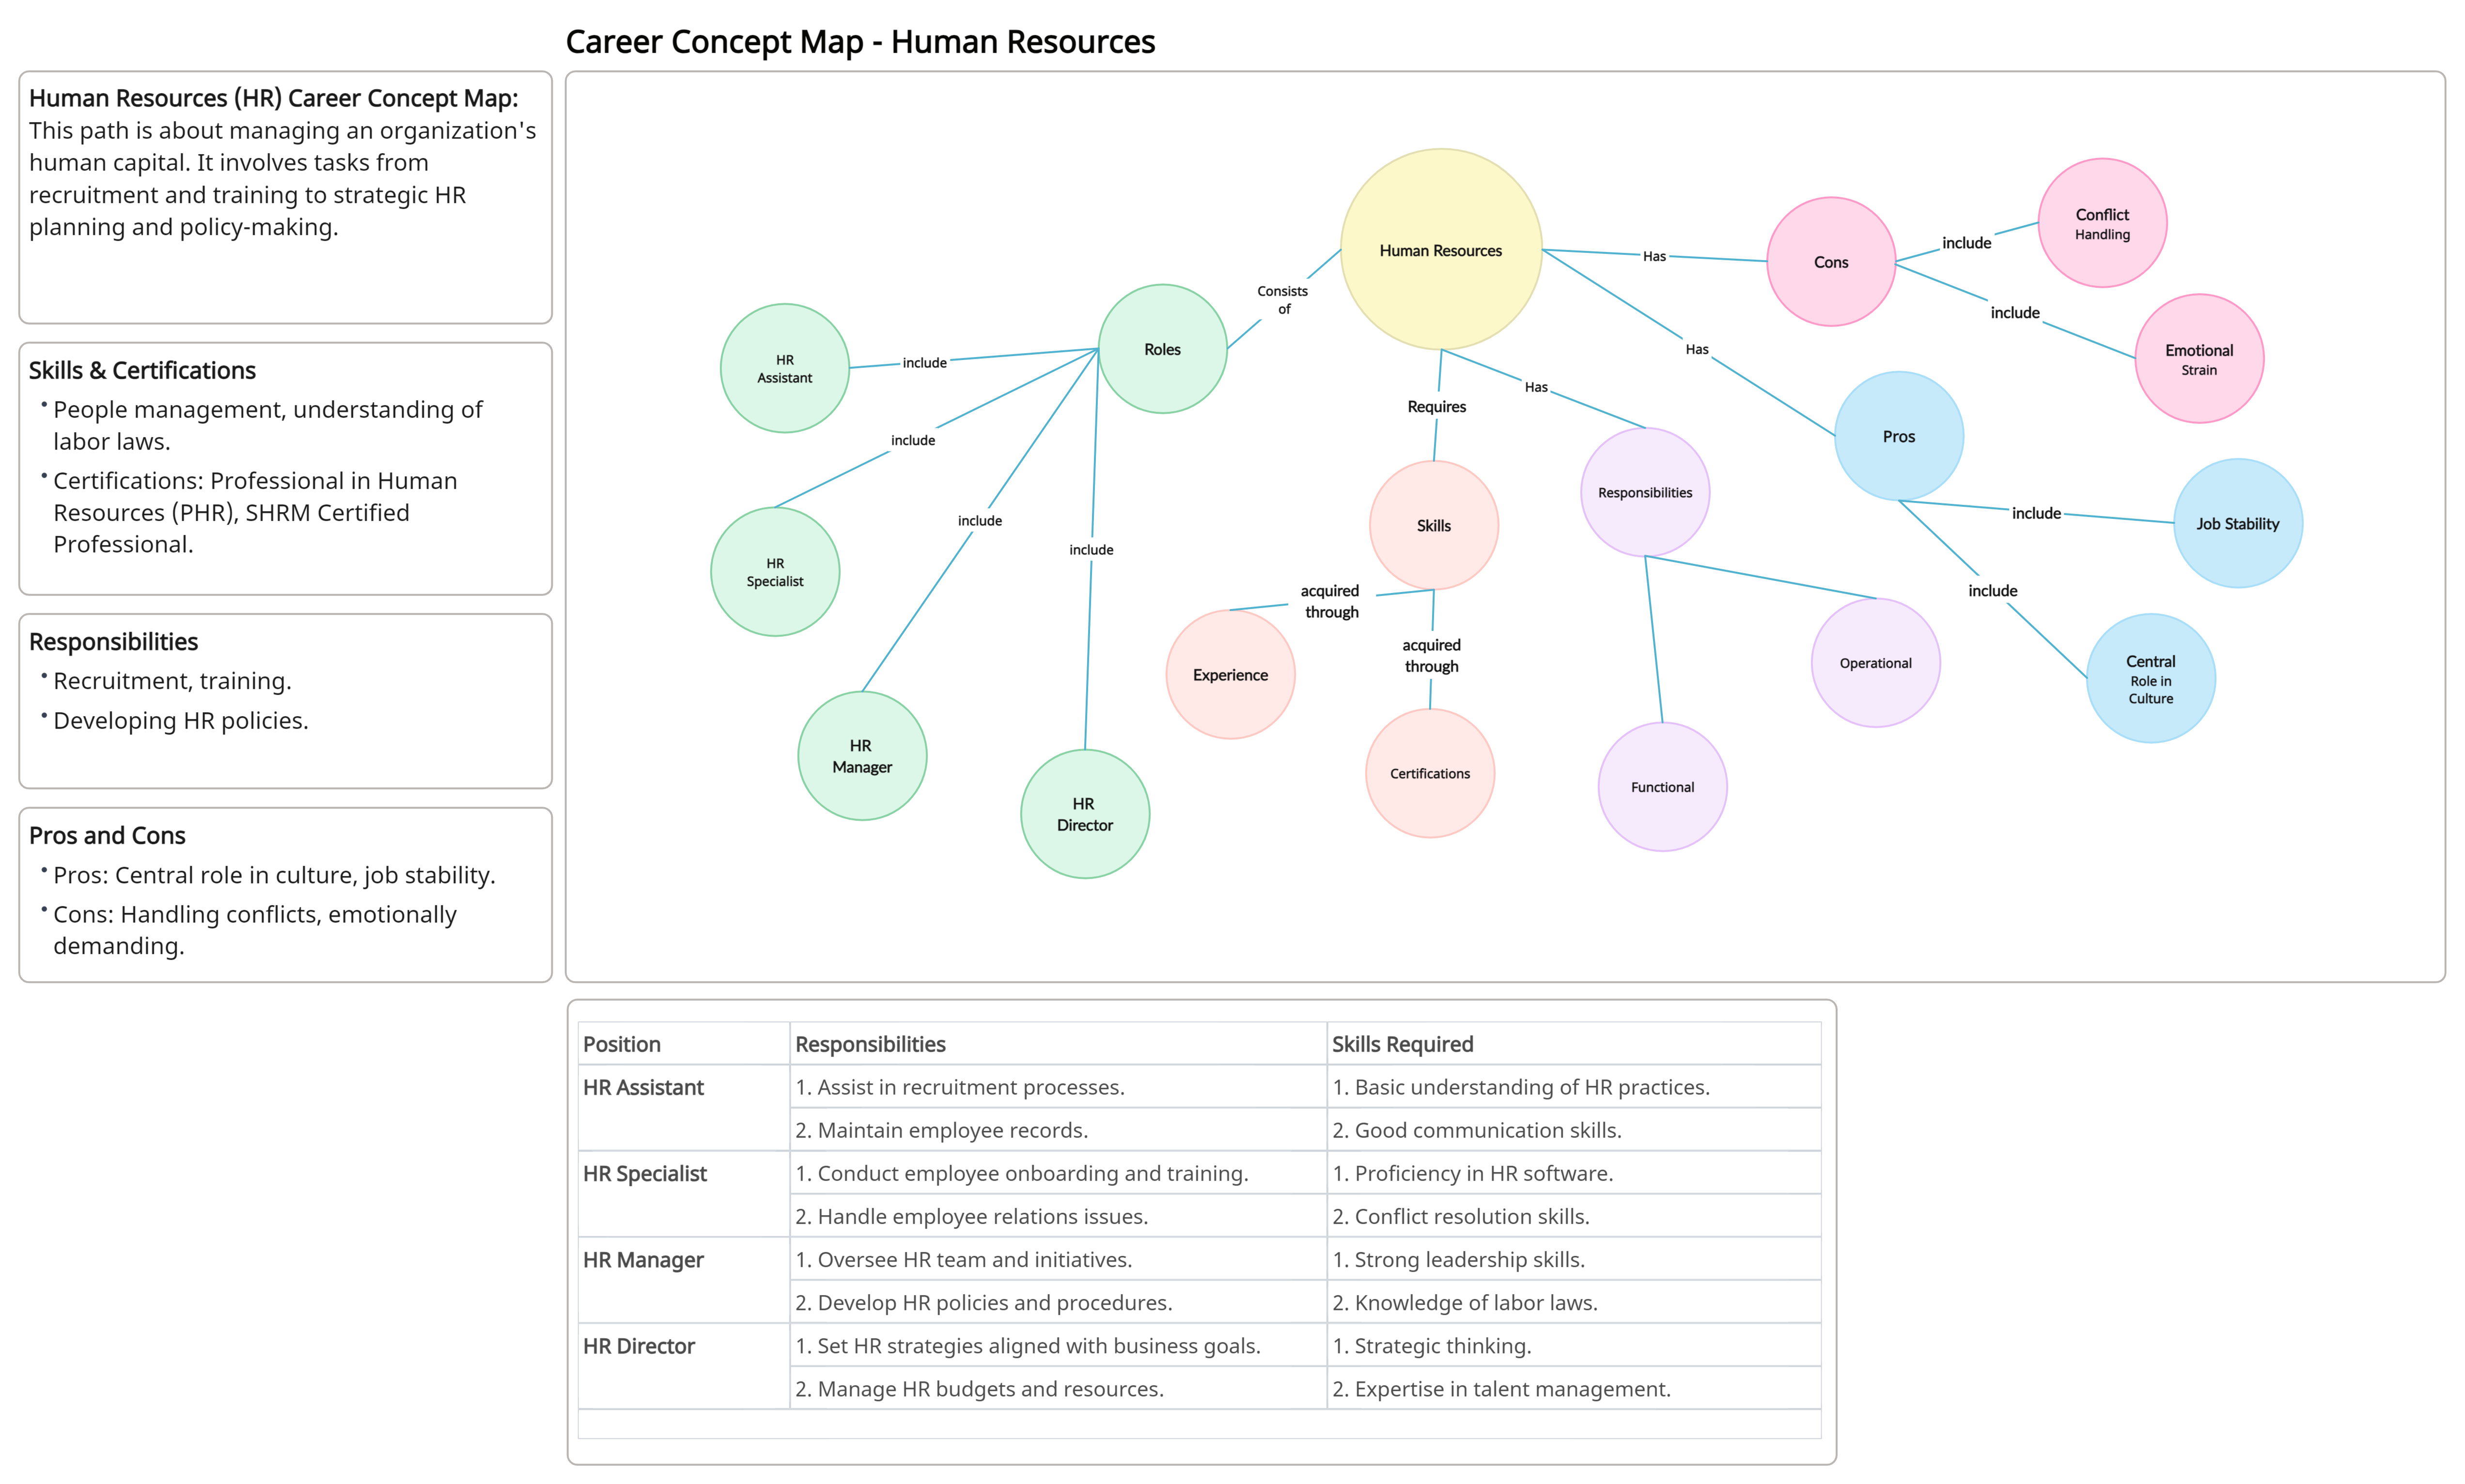 Human Resources Career Concept Map